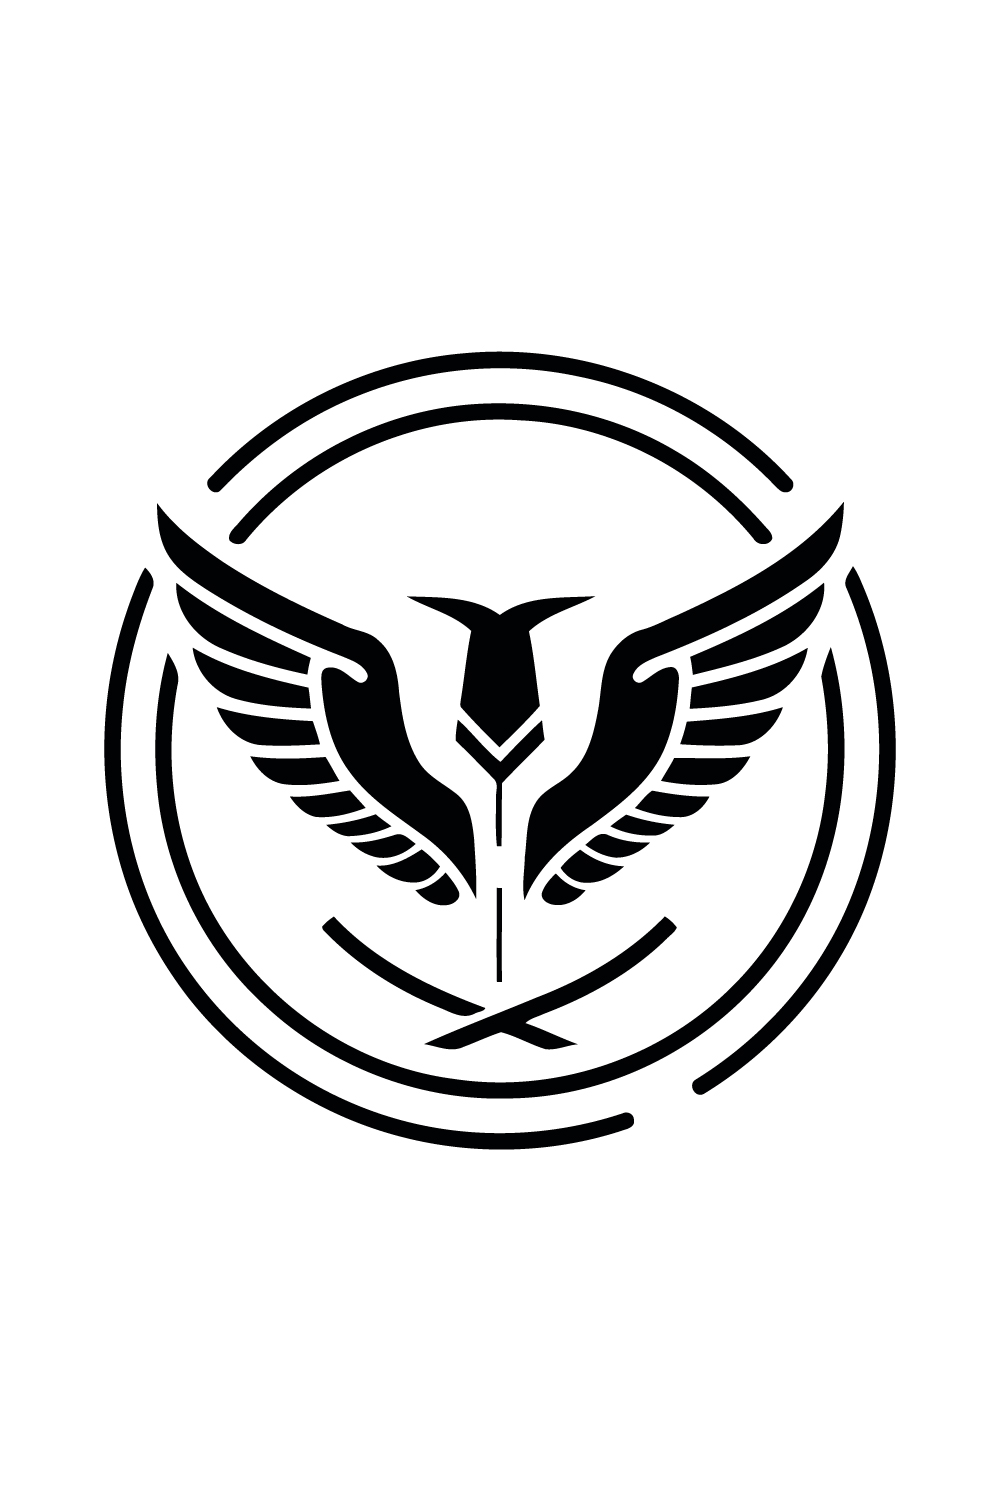 wings logo design pinterest preview image.